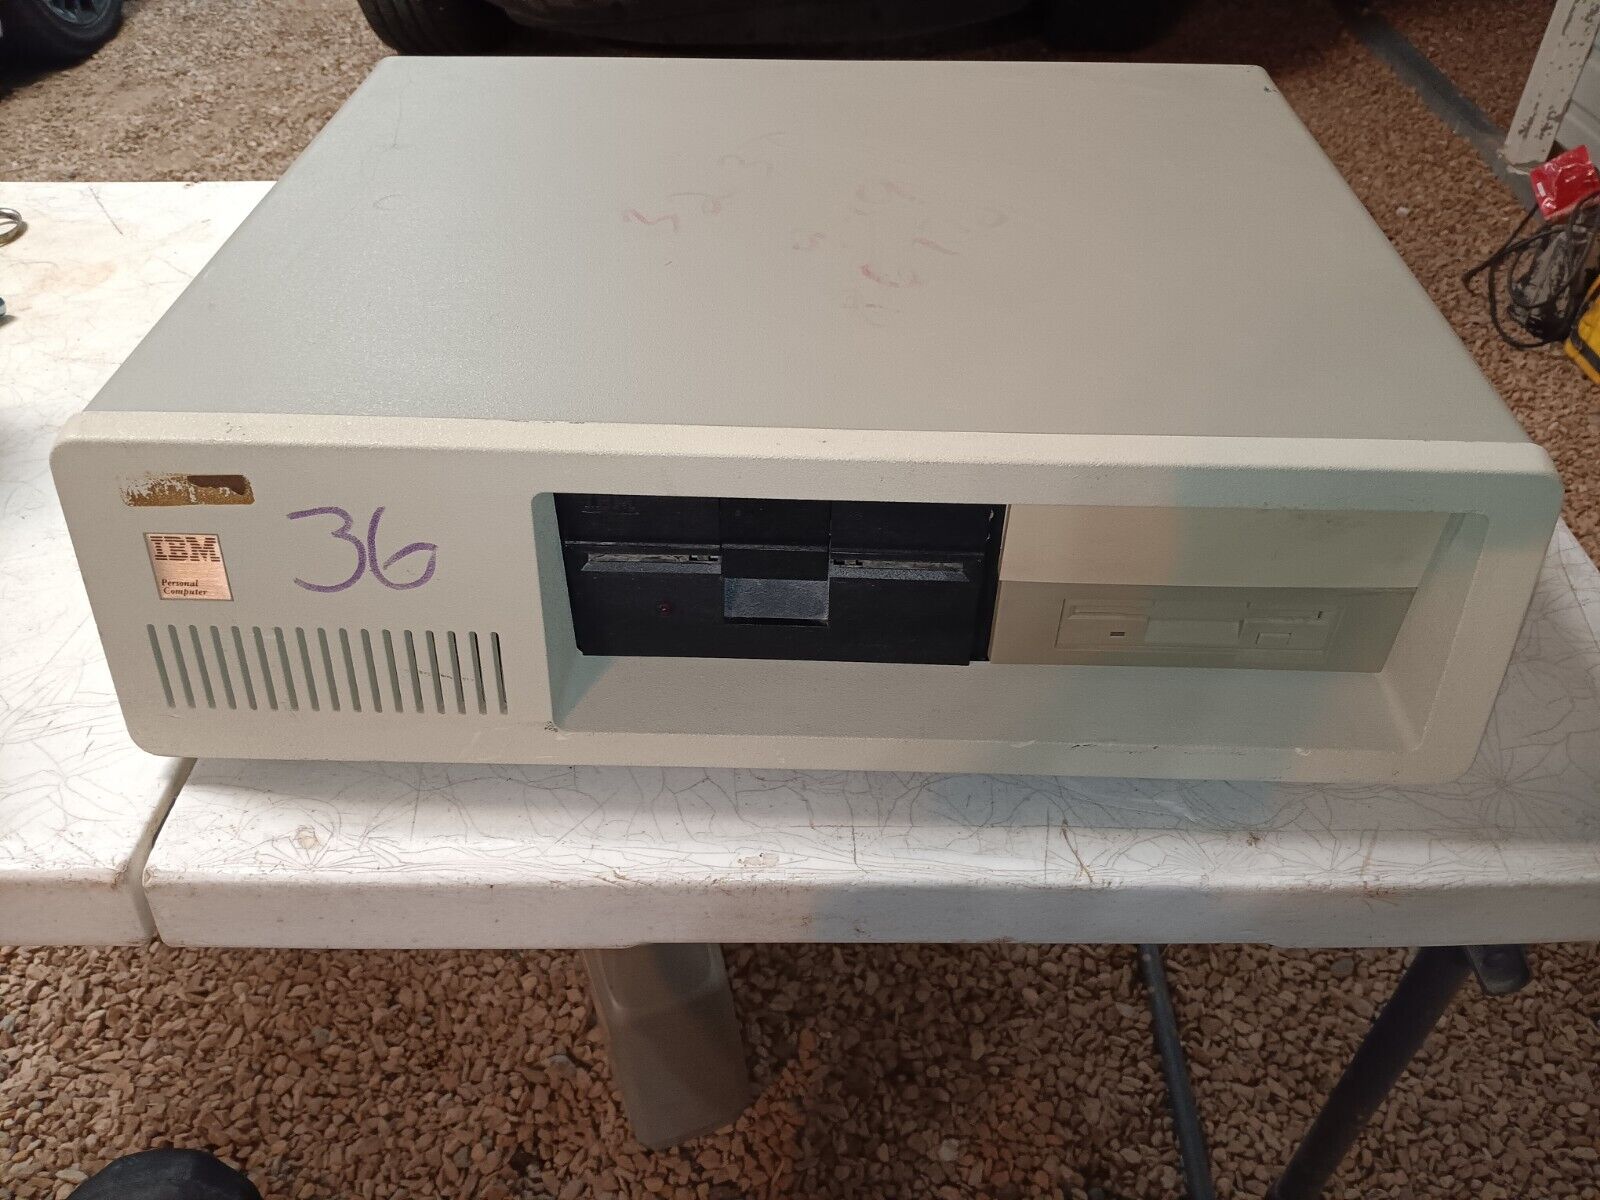 Vintage 1980s, IBM Personal Computer Type 5150 POWERS ON, PARTS OR RESTORE